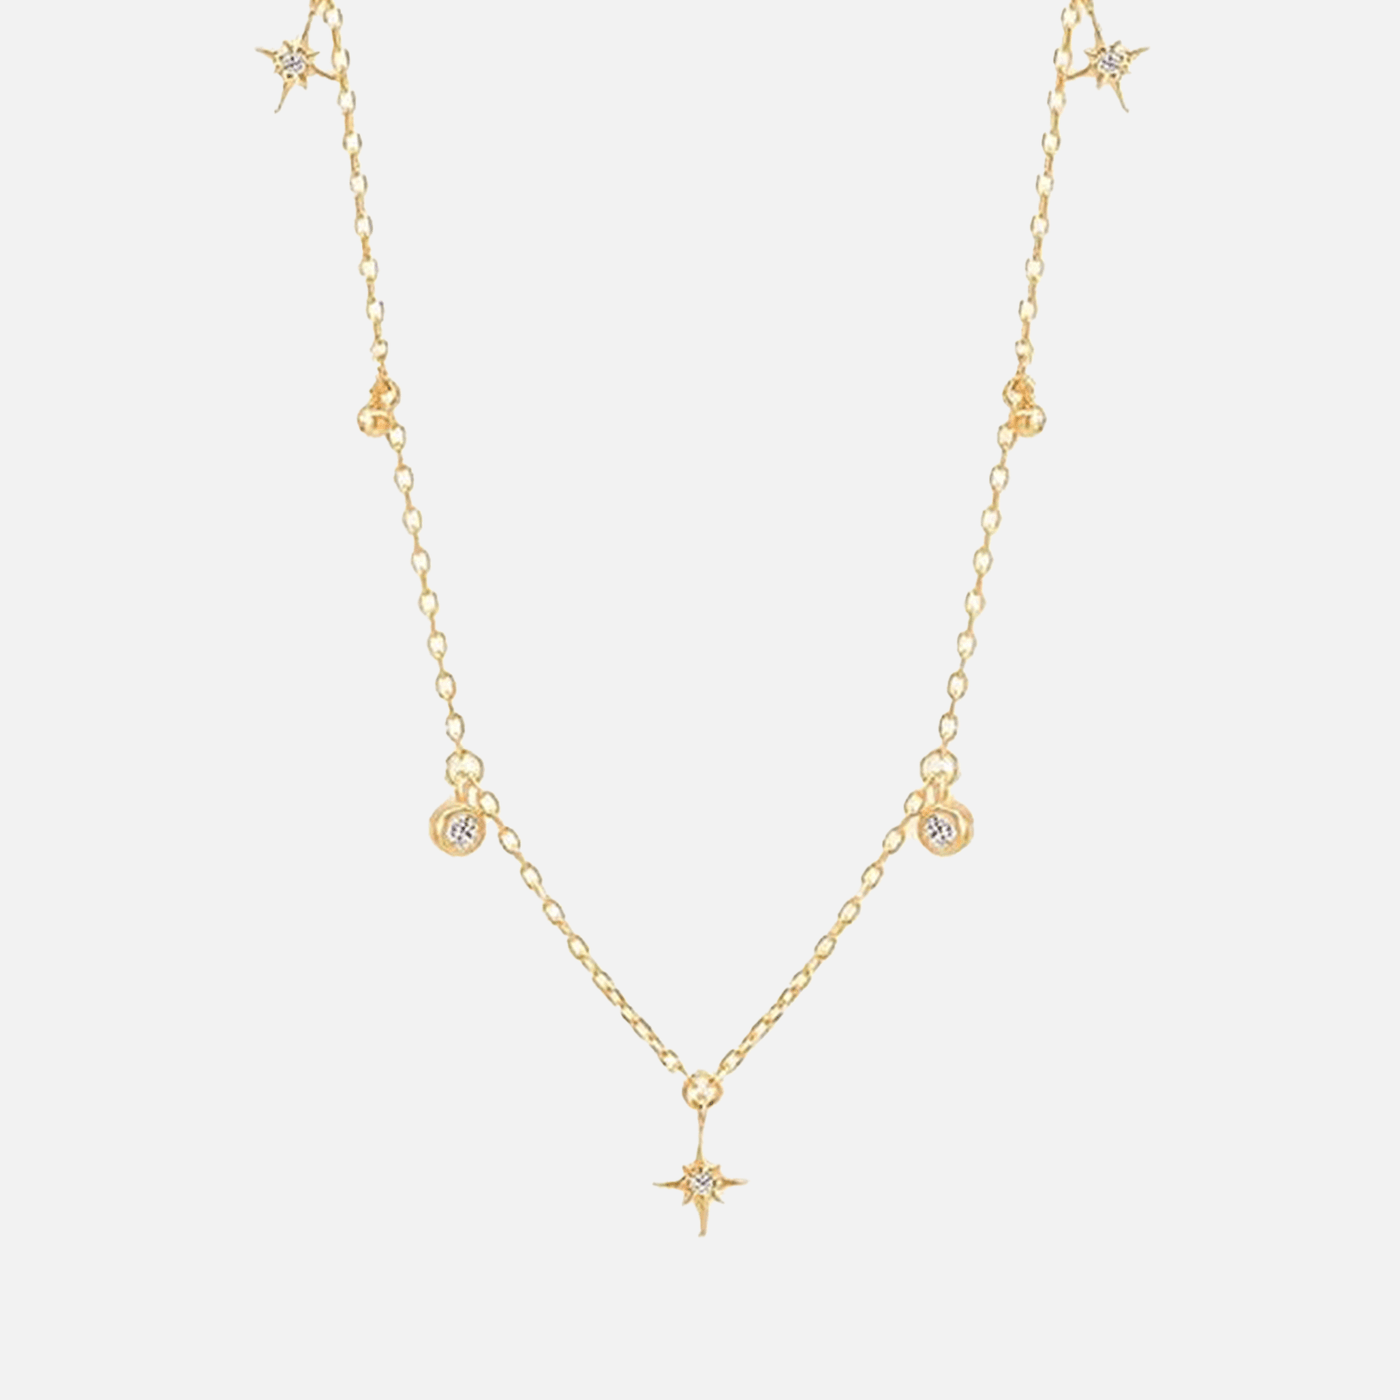 Star Charm Necklace 18k Gold Plated